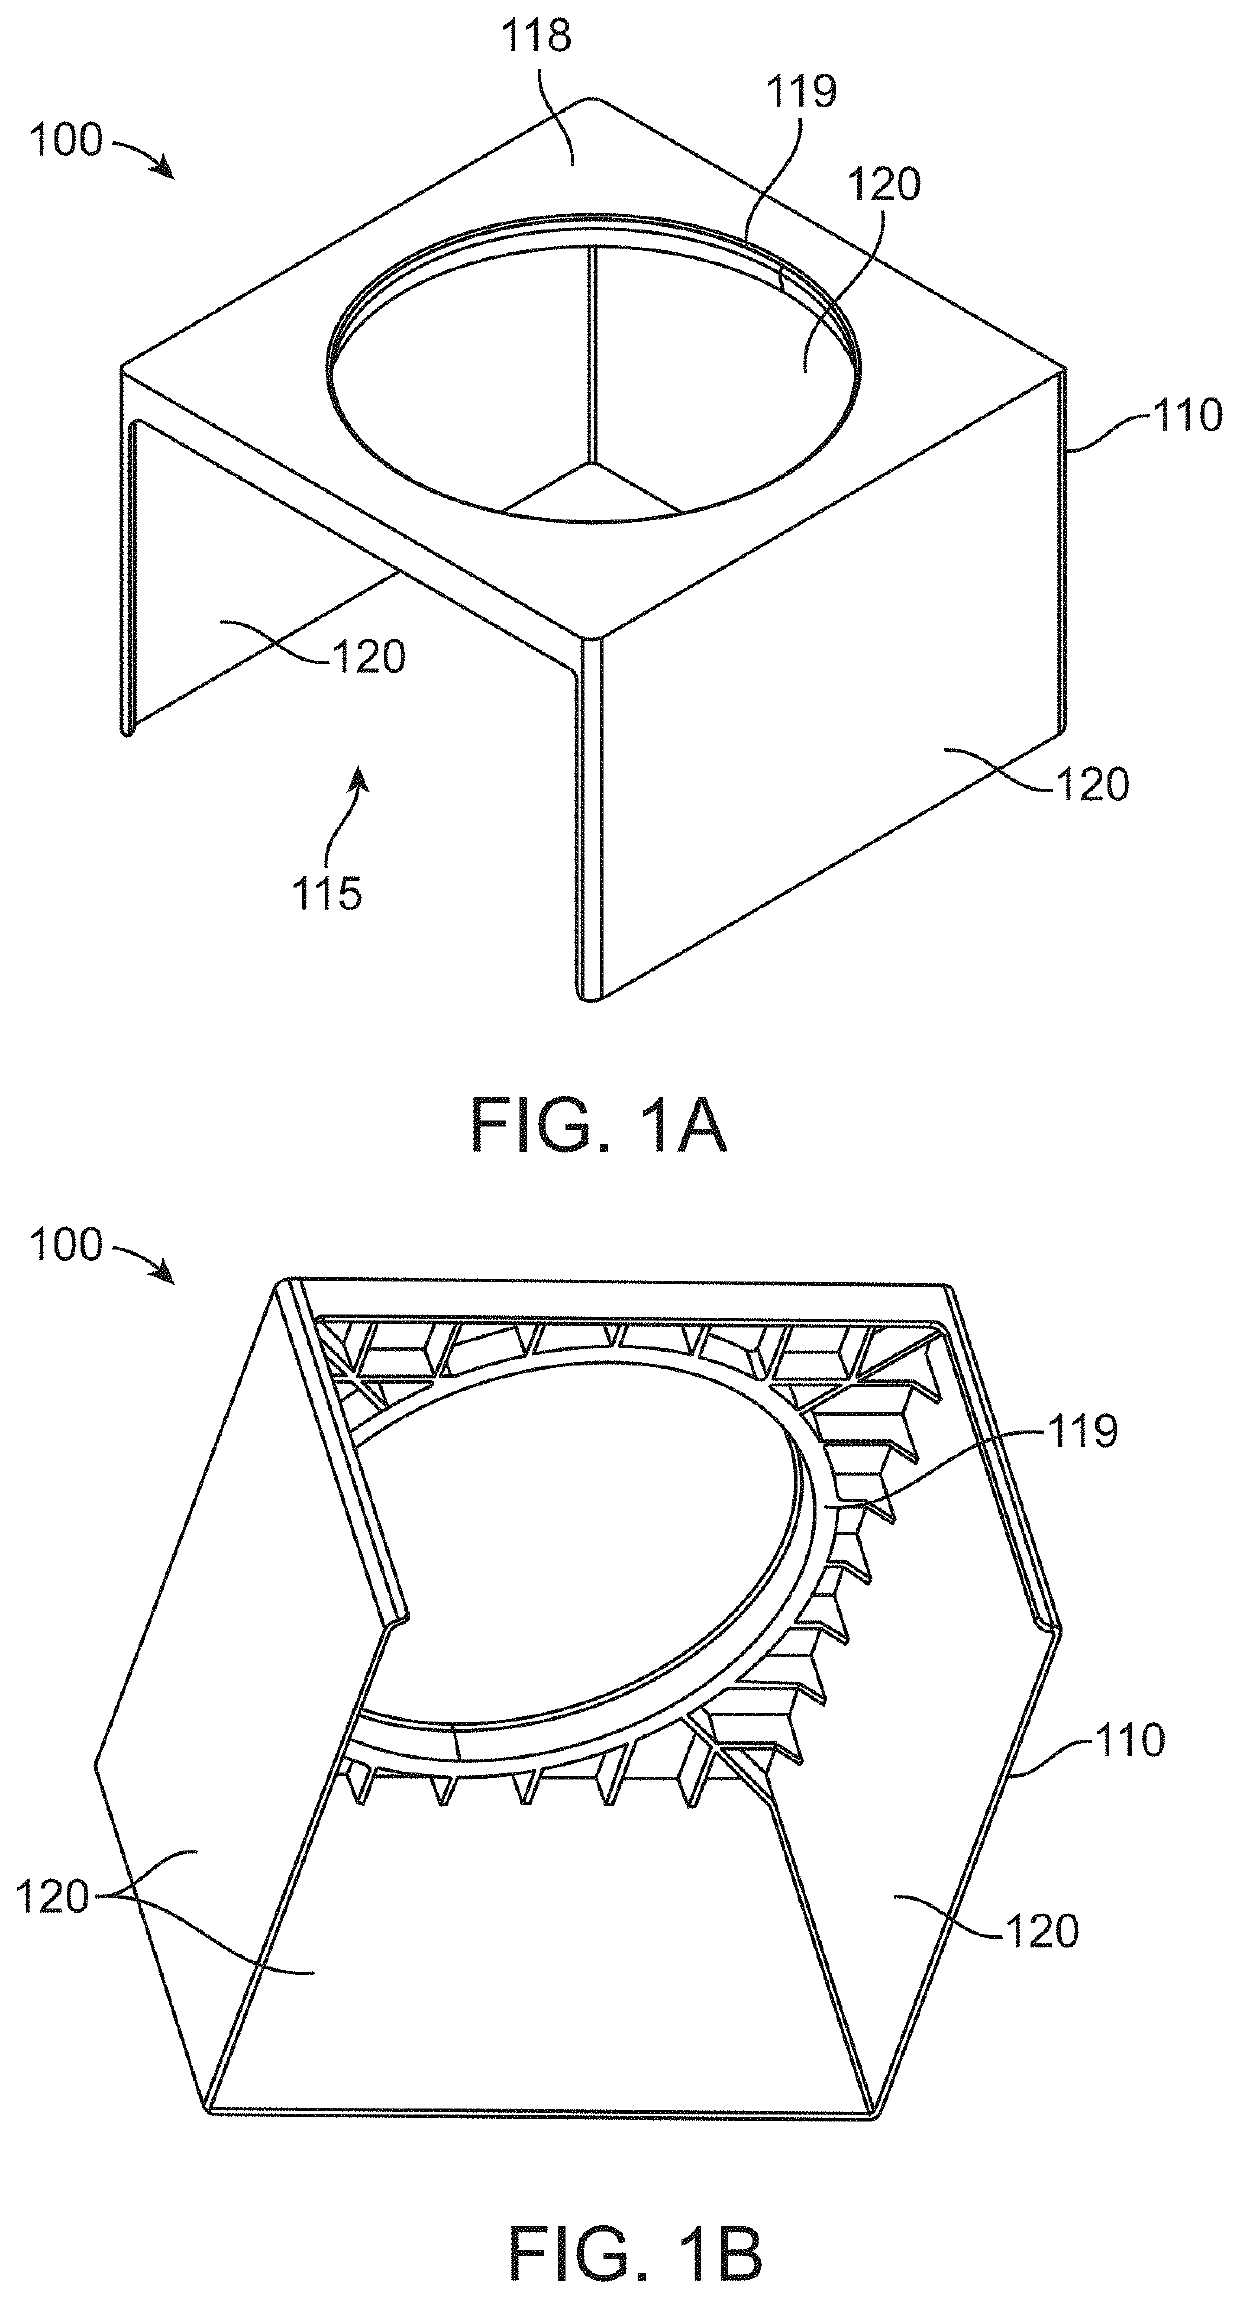 Systems and methods for packaging articles to be embroidered